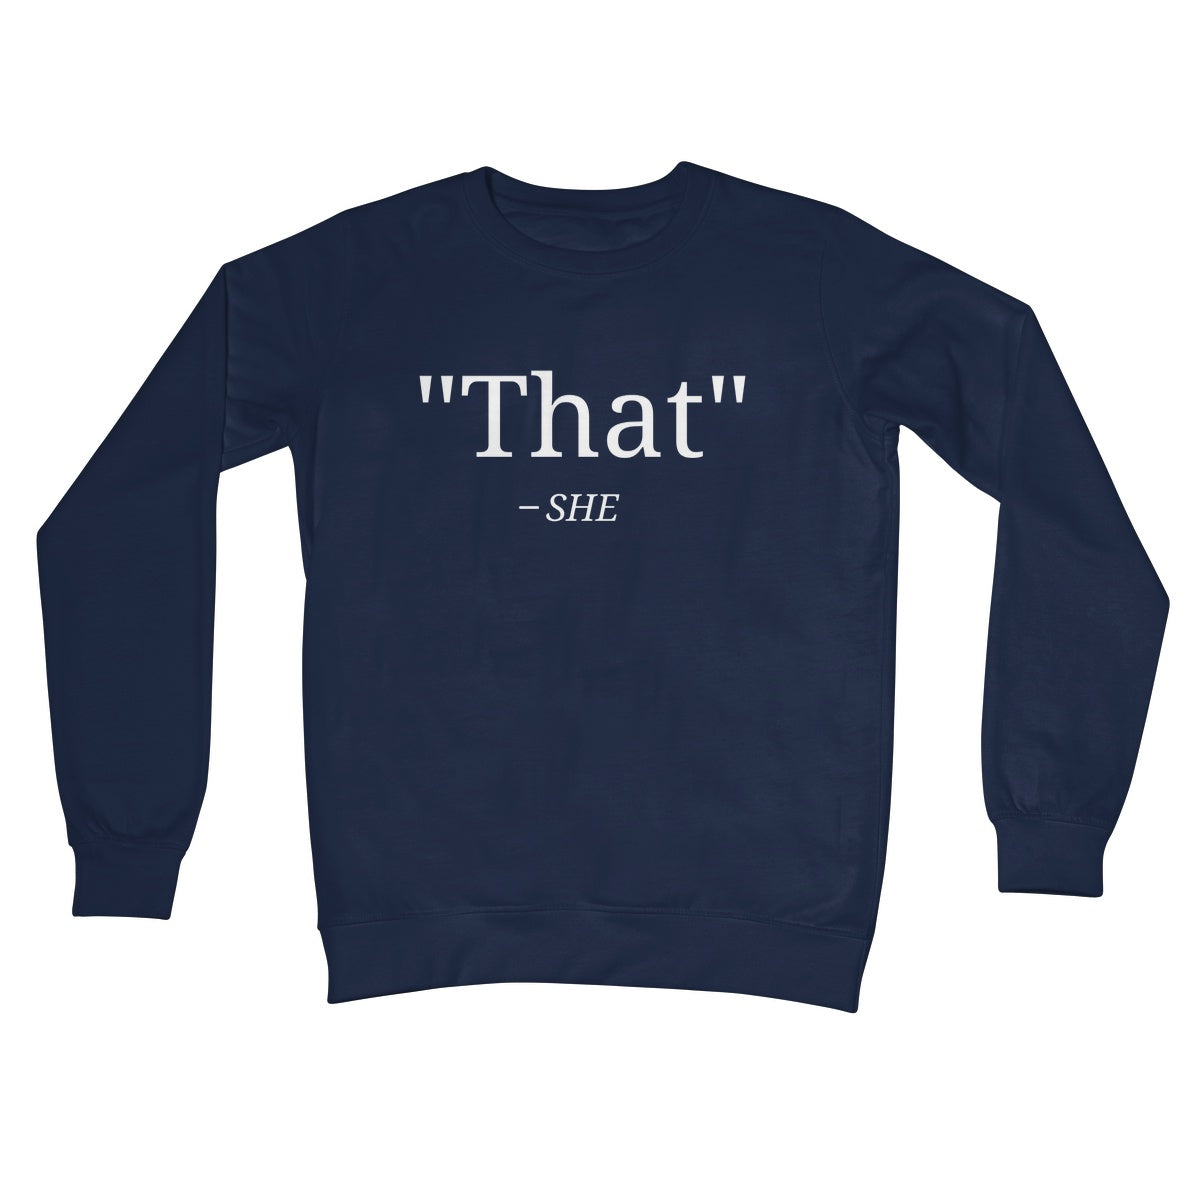 that's what she said jumper navy